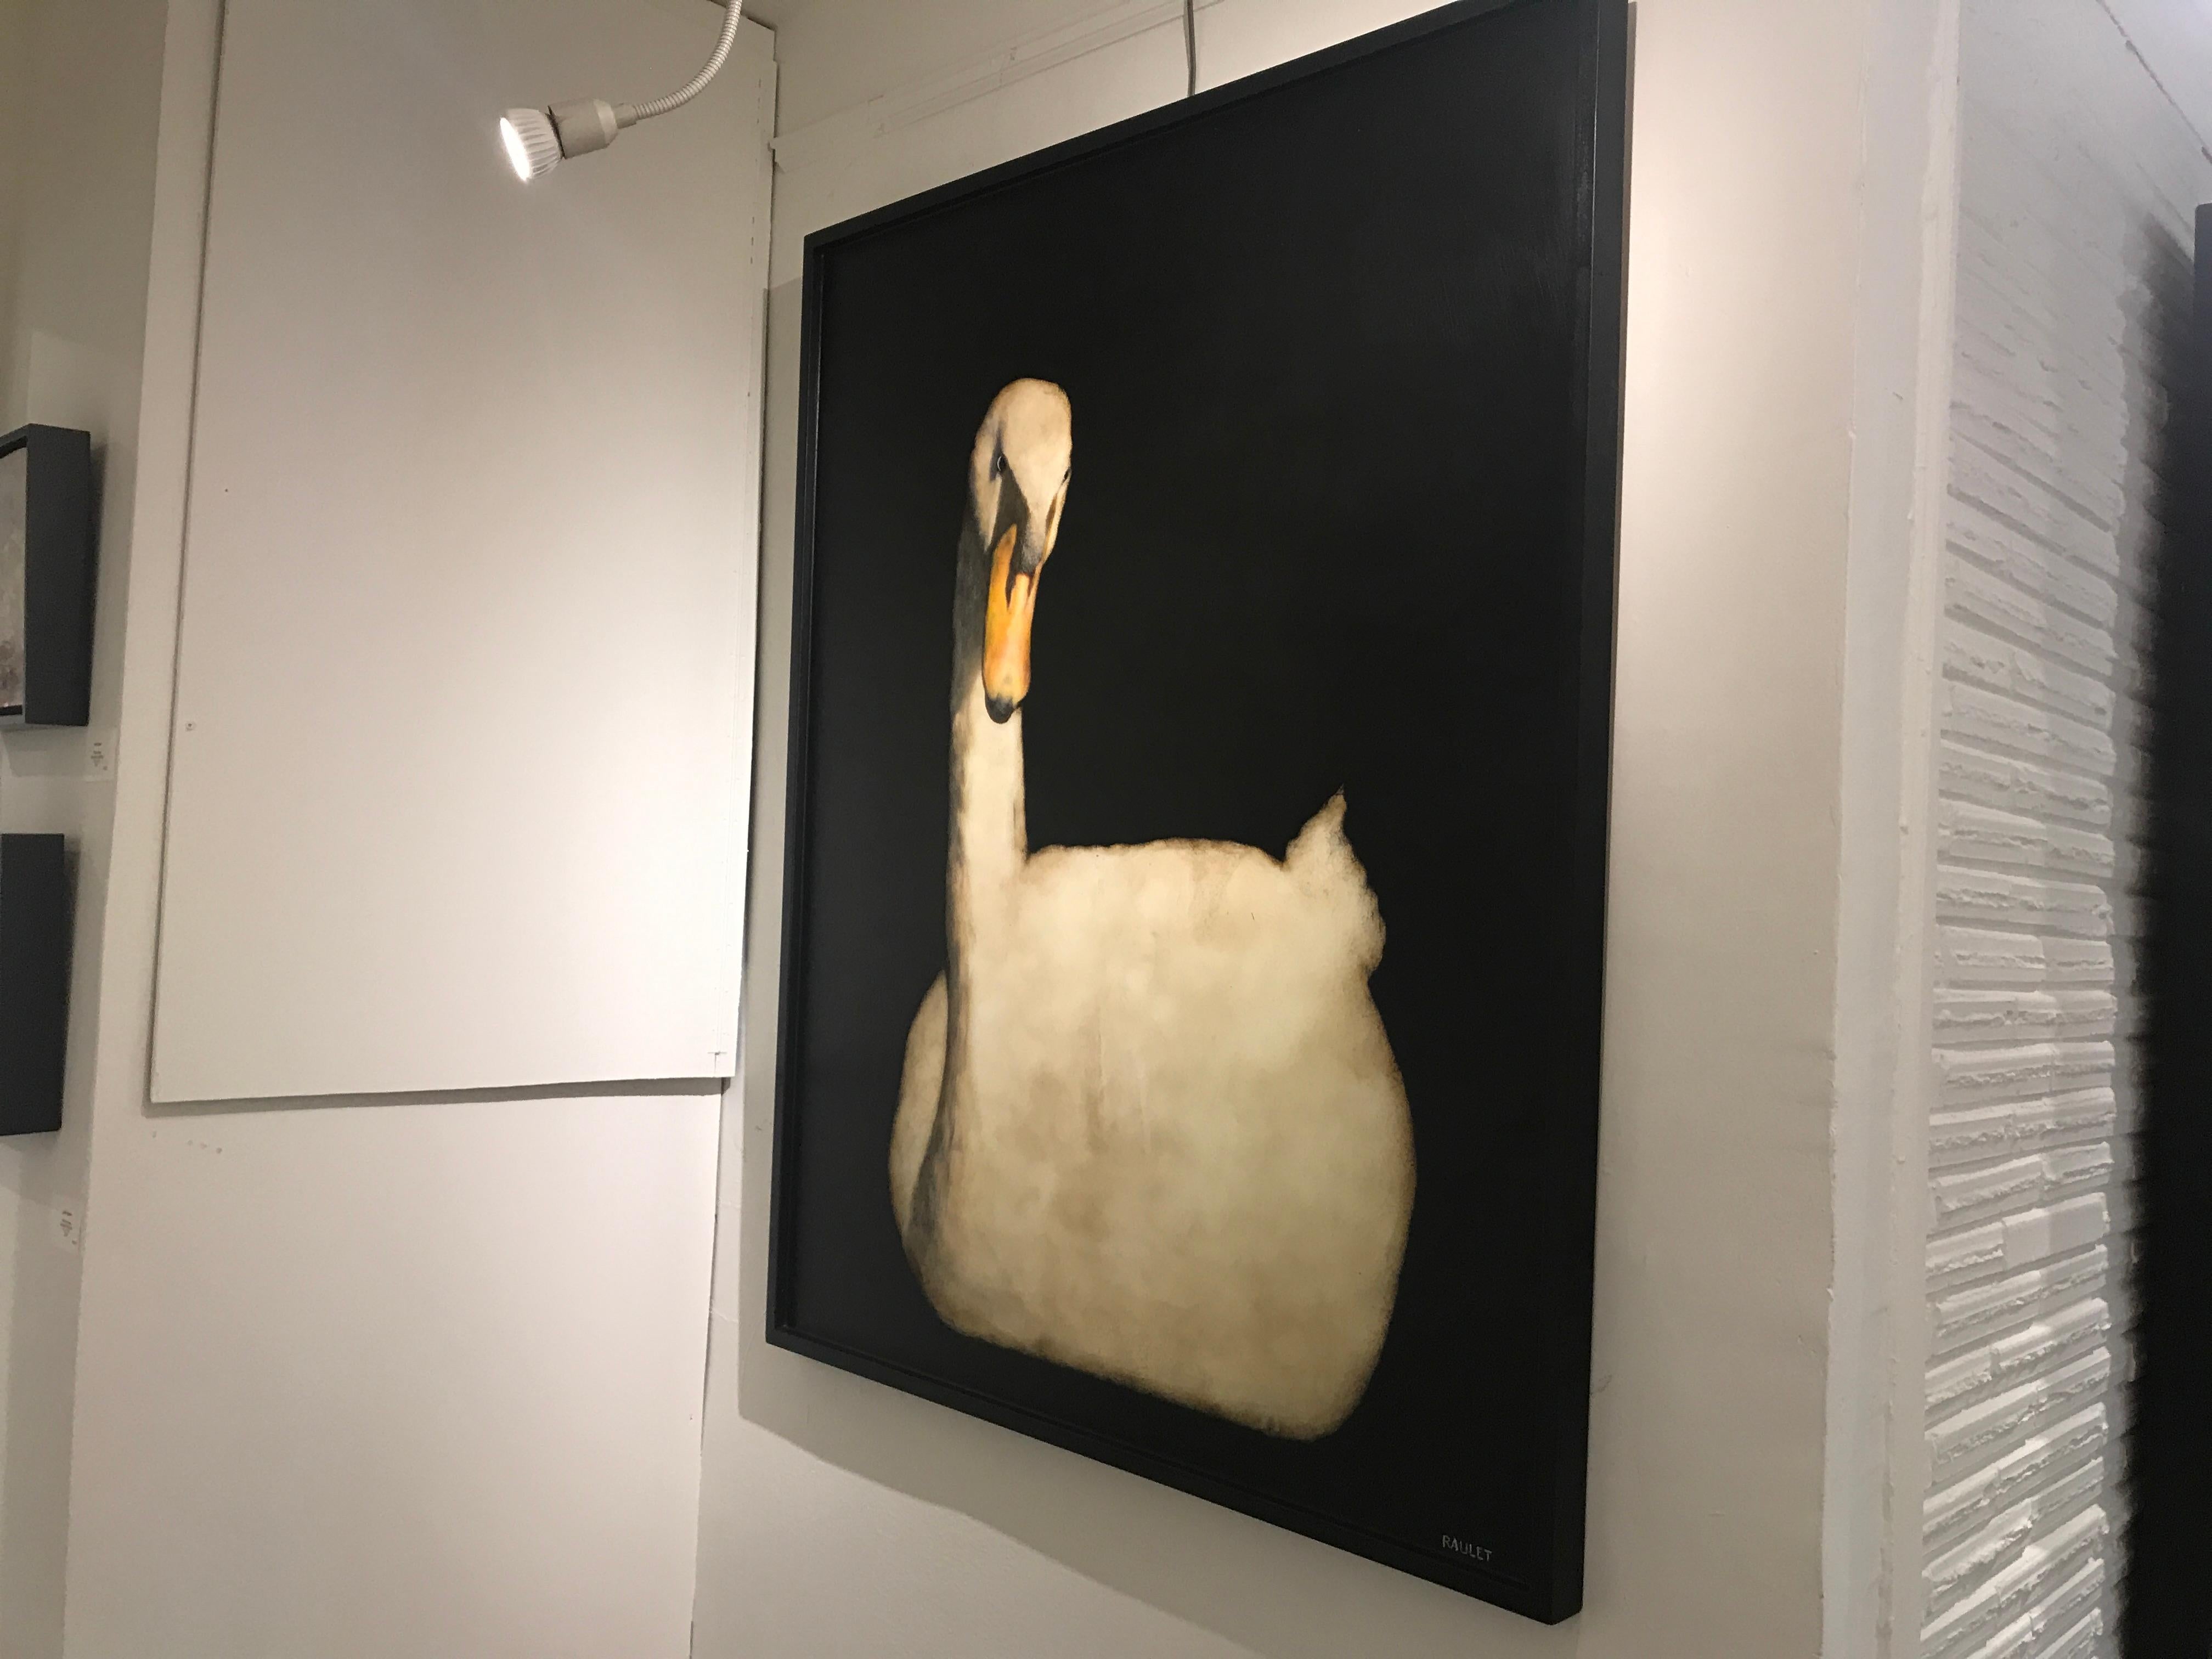 'Pippa' is a large framed contemporary mixed media on board swan painting created by American artist Dawne Raulet in 2018. Painted on a striking black background that allows our eye to focus beautifully on the subject, a graceful swan steals the